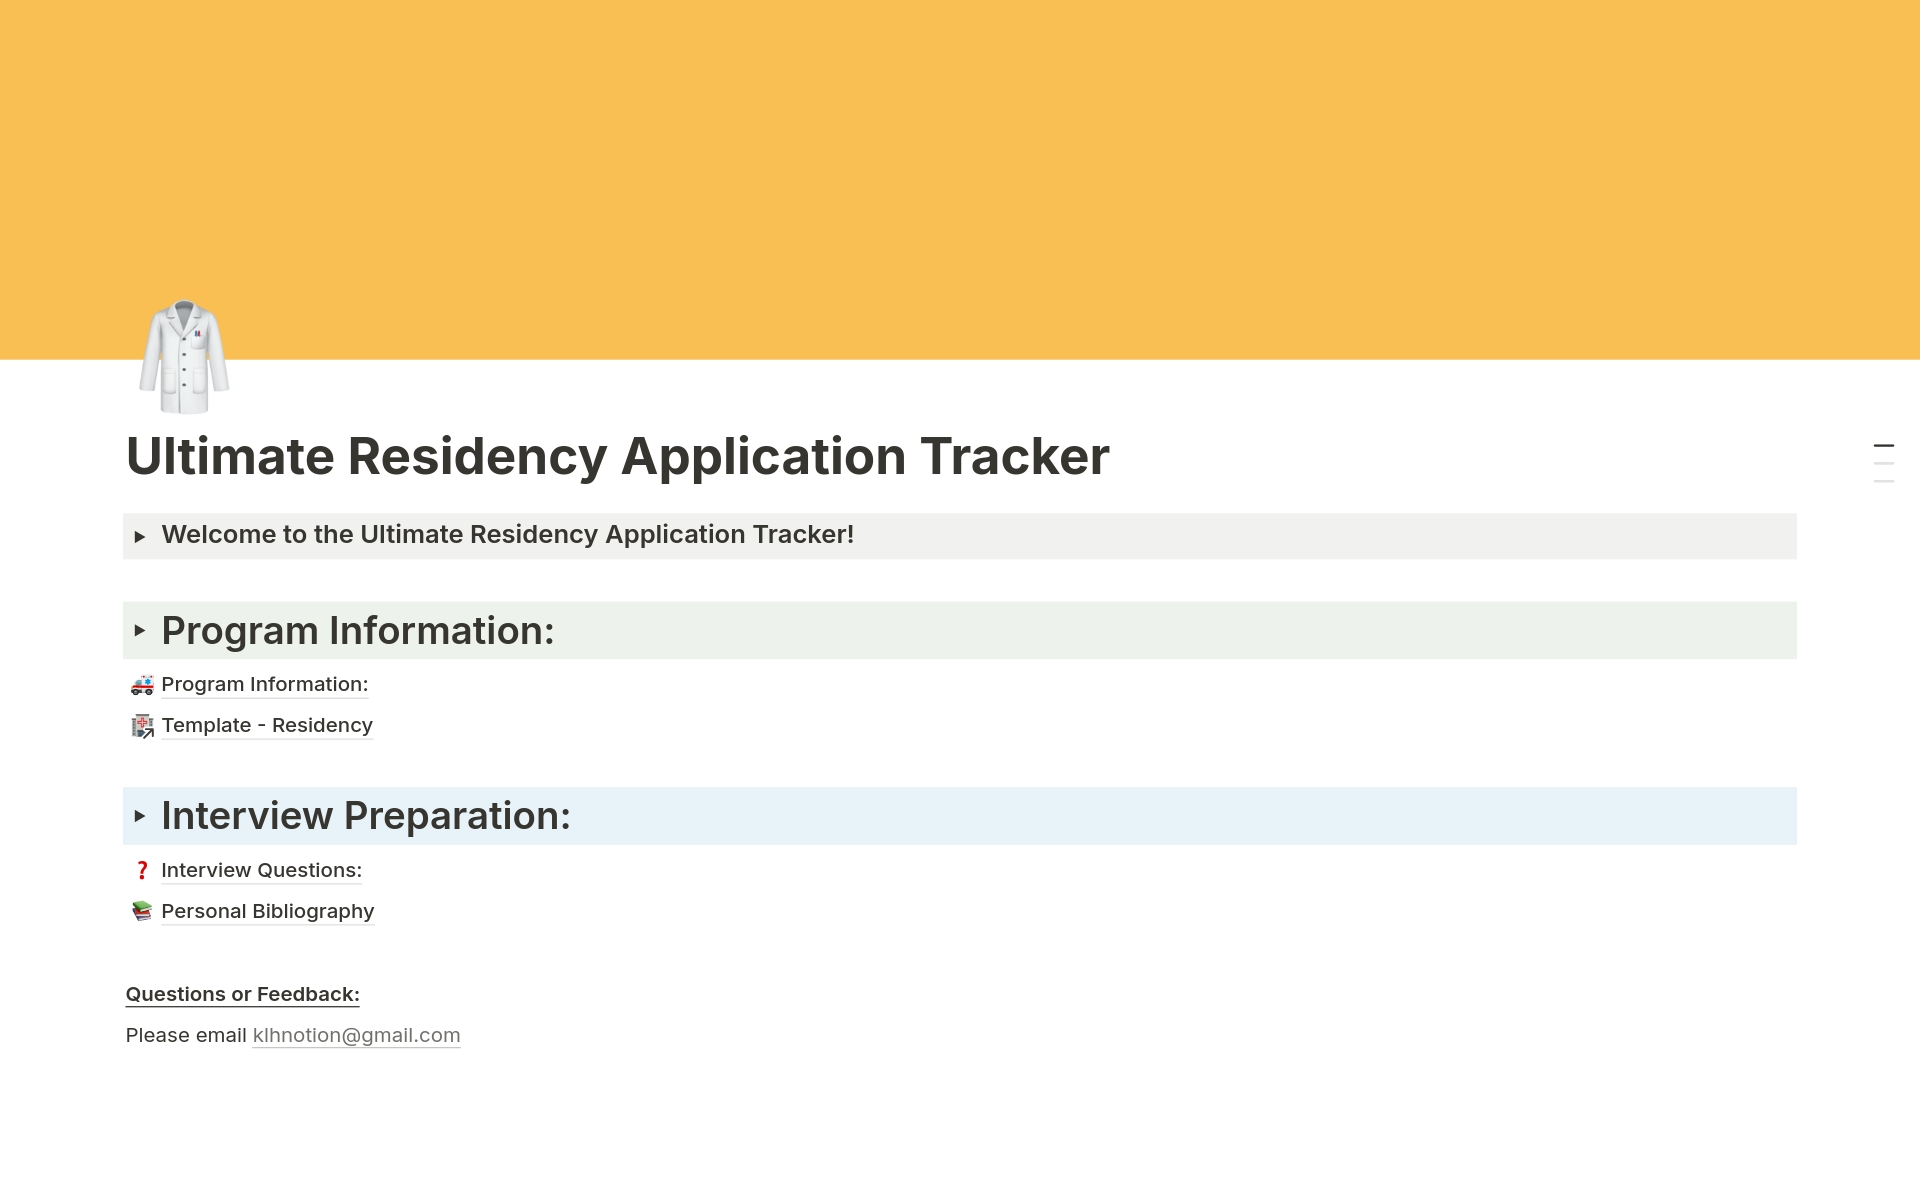 This is a simple-to-use Database that will help you quickly organize your residency application. By using this system designed by medical students, you will be able to quickly record, store, and review high-yield information about your programs and create your rank list!